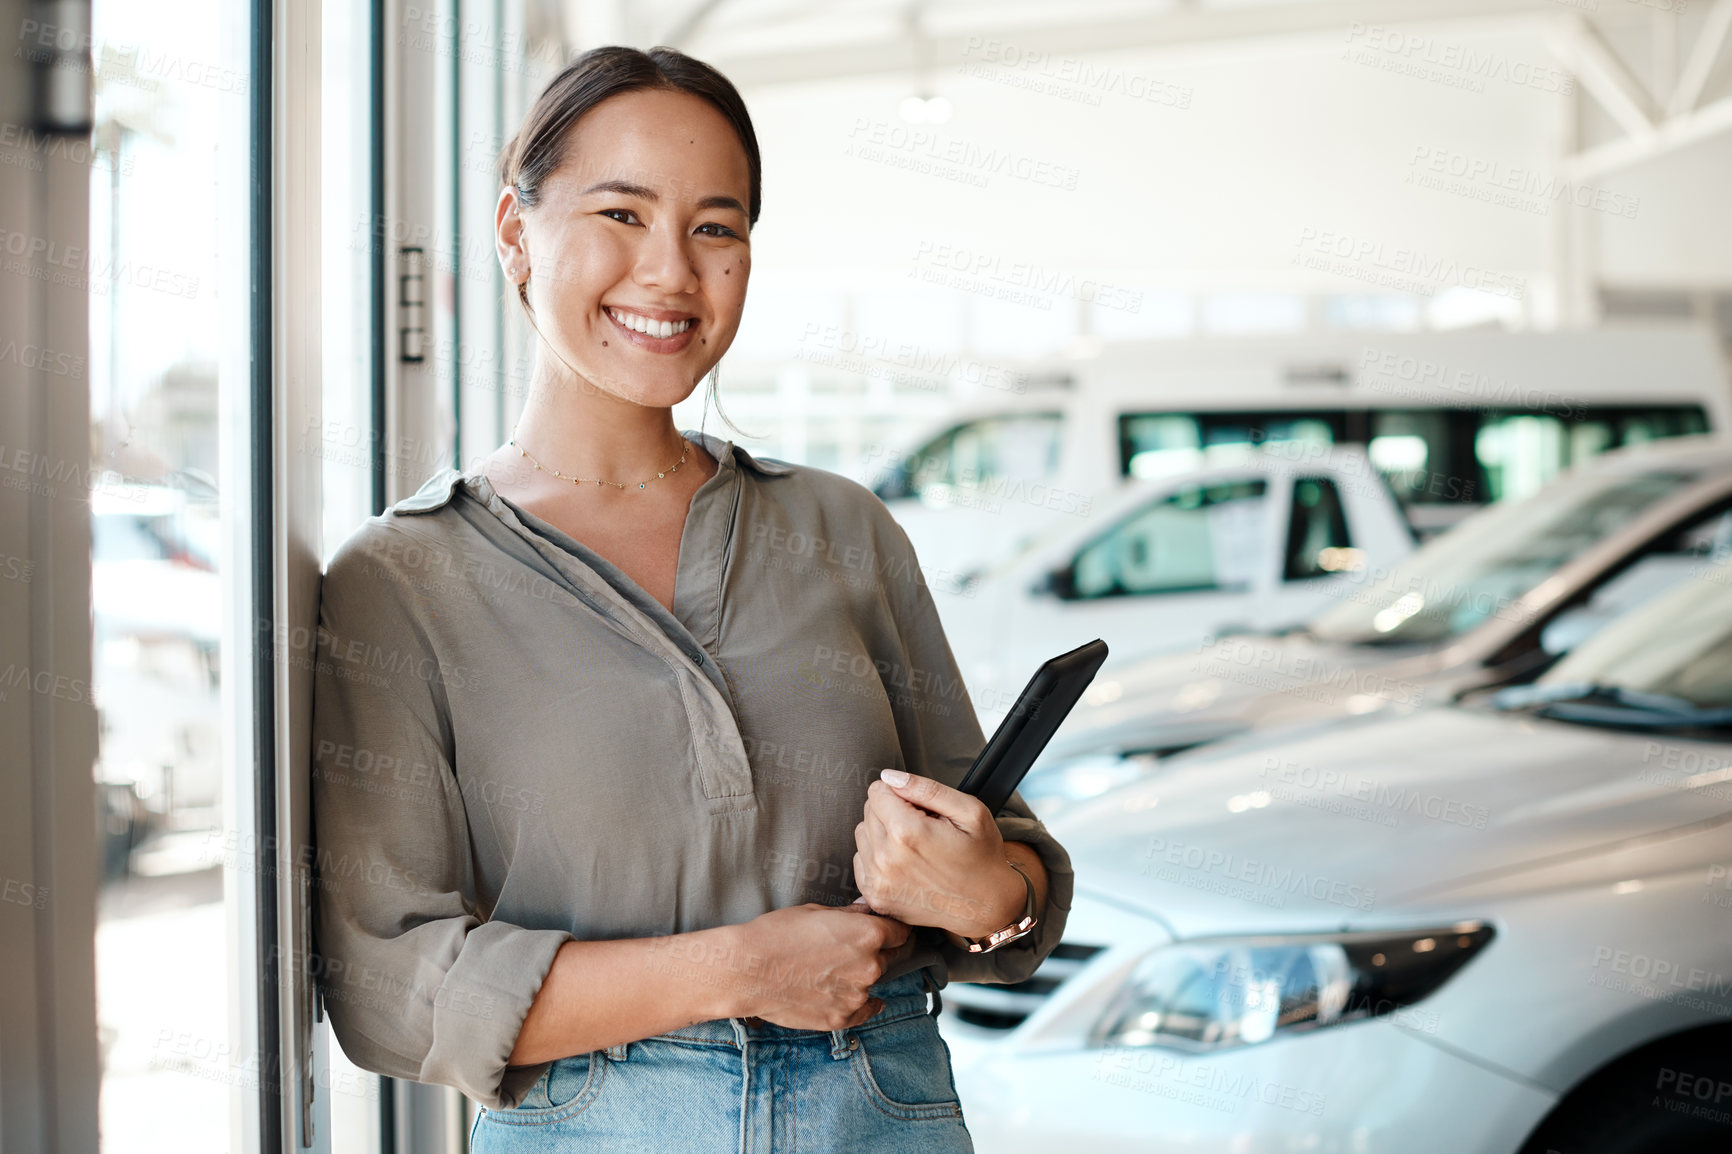 Buy stock photo Shot of a woman using her digital tablet in a car dealership